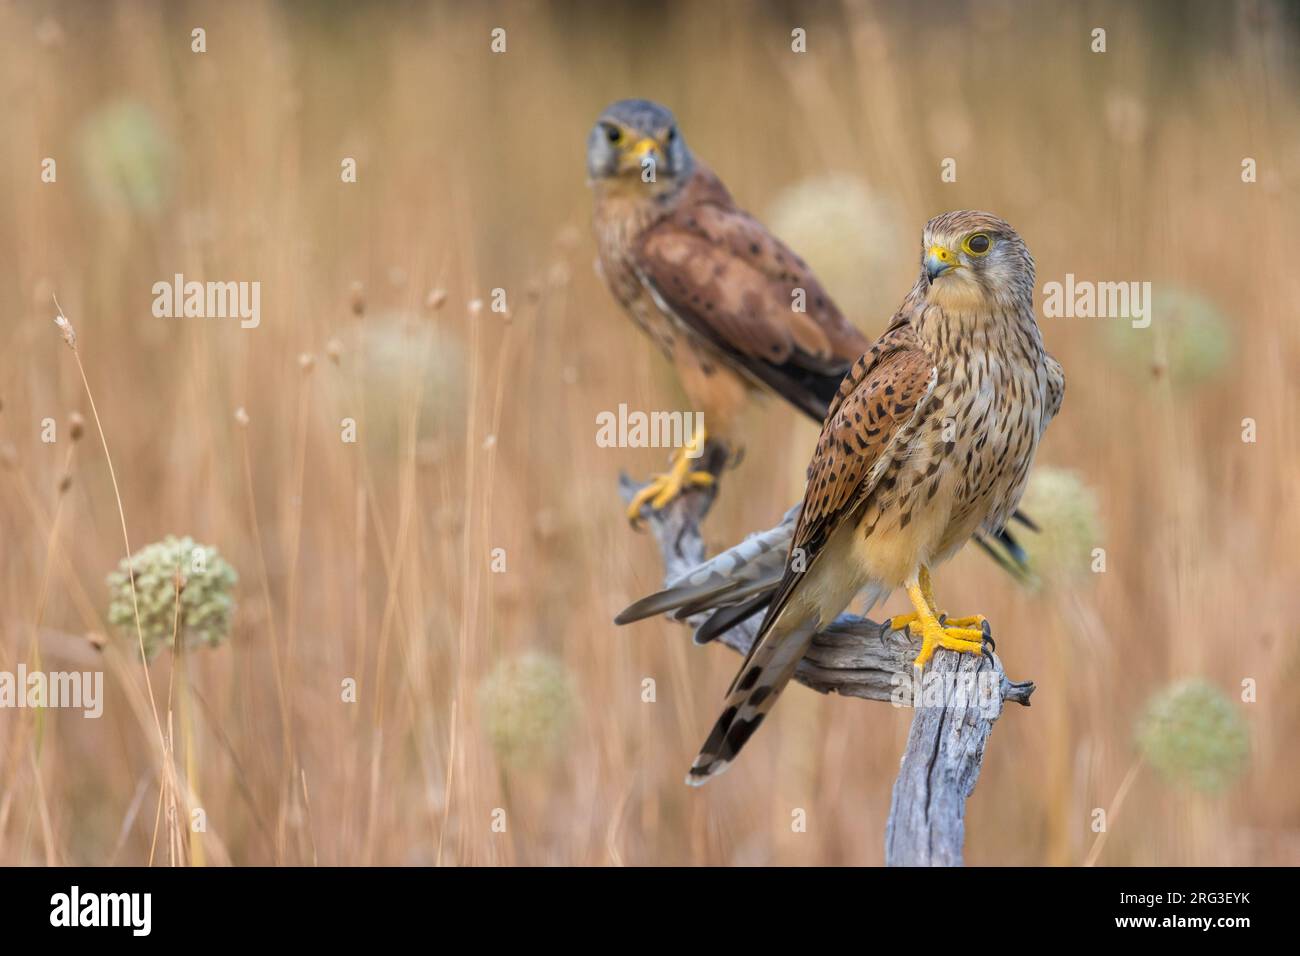 Pair of Common Kestrels (Falco tinnunculus) in Italy. Perched on a wooden pole in an agricultural field. Female in the foreground, male in the backgro Stock Photo